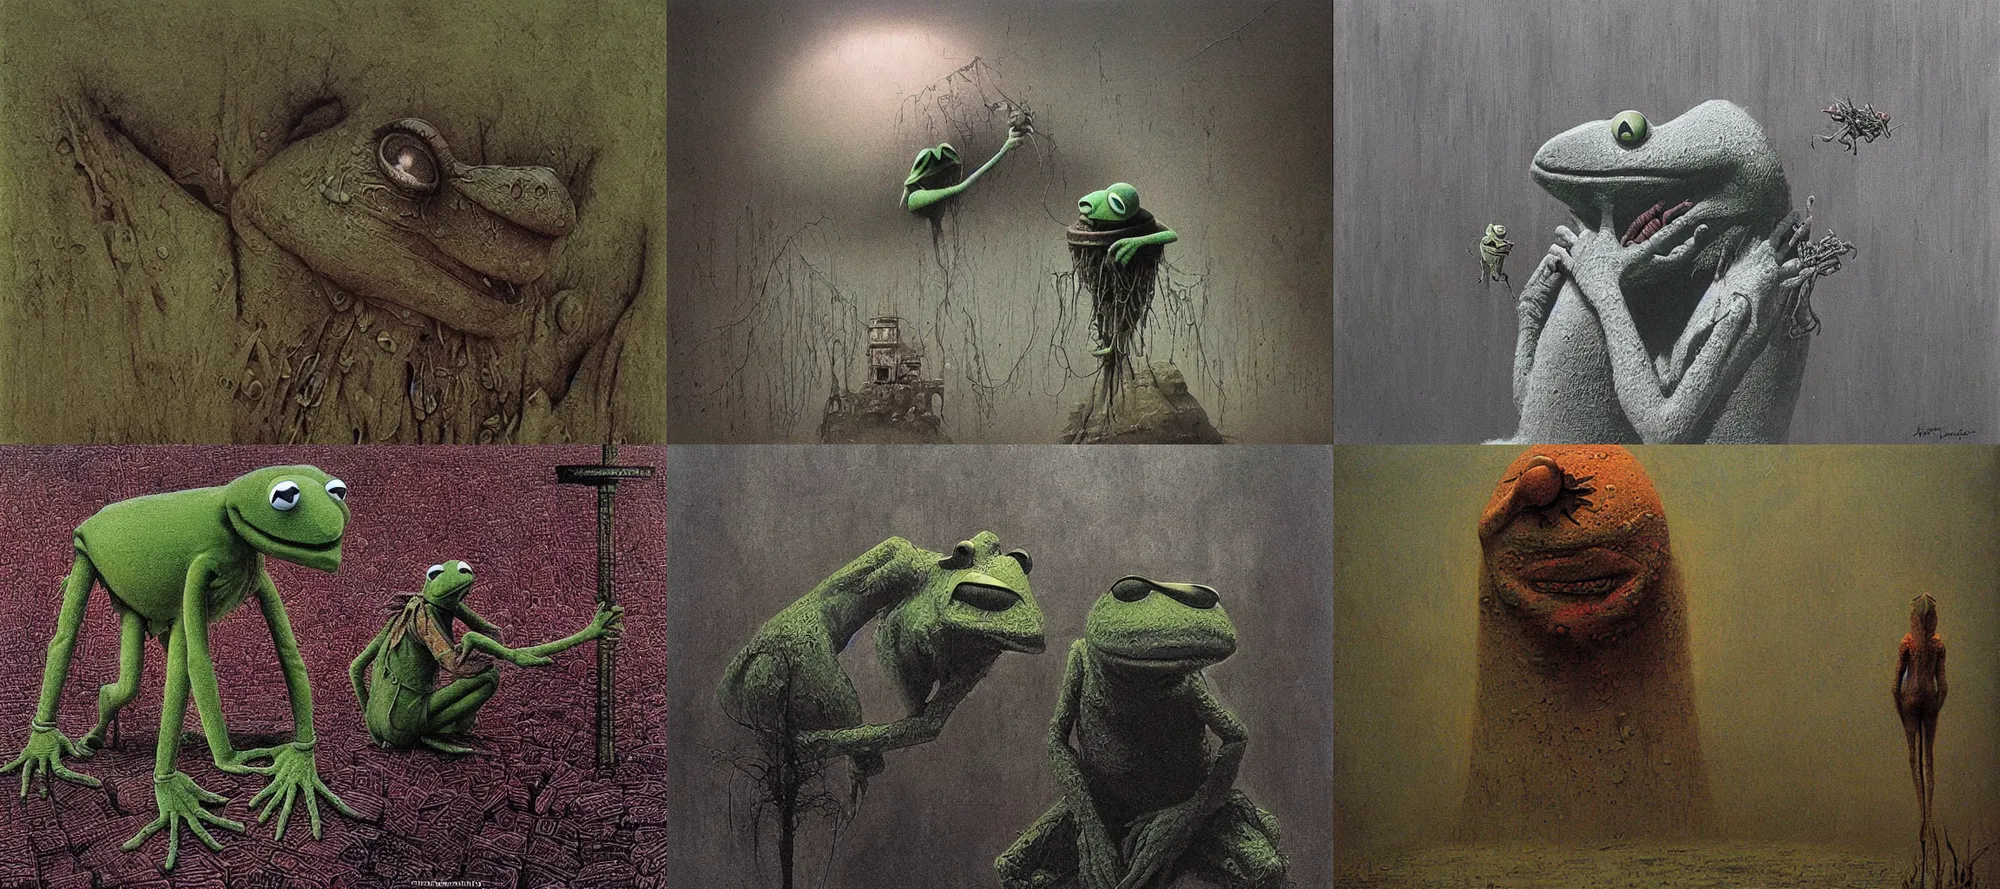 Kermit the frog megalophobia by beksinski | Stable Diffusion | OpenArt